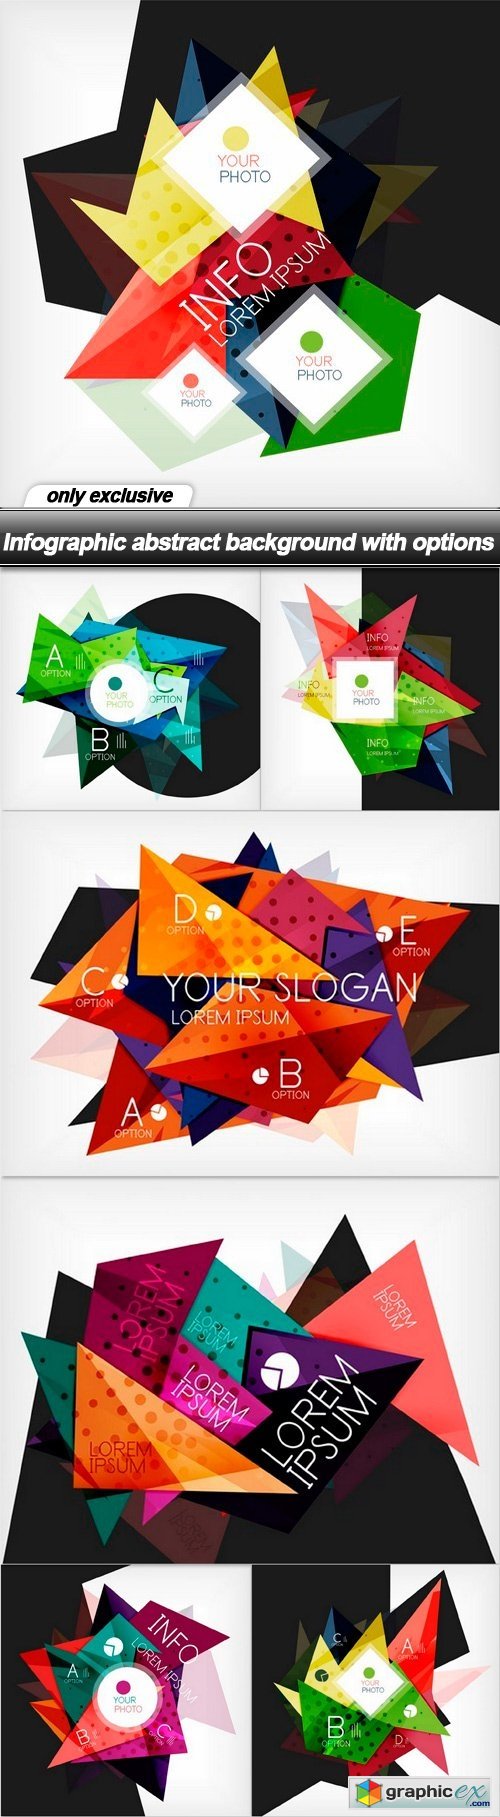 Infographic abstract background with options - 7 EPS